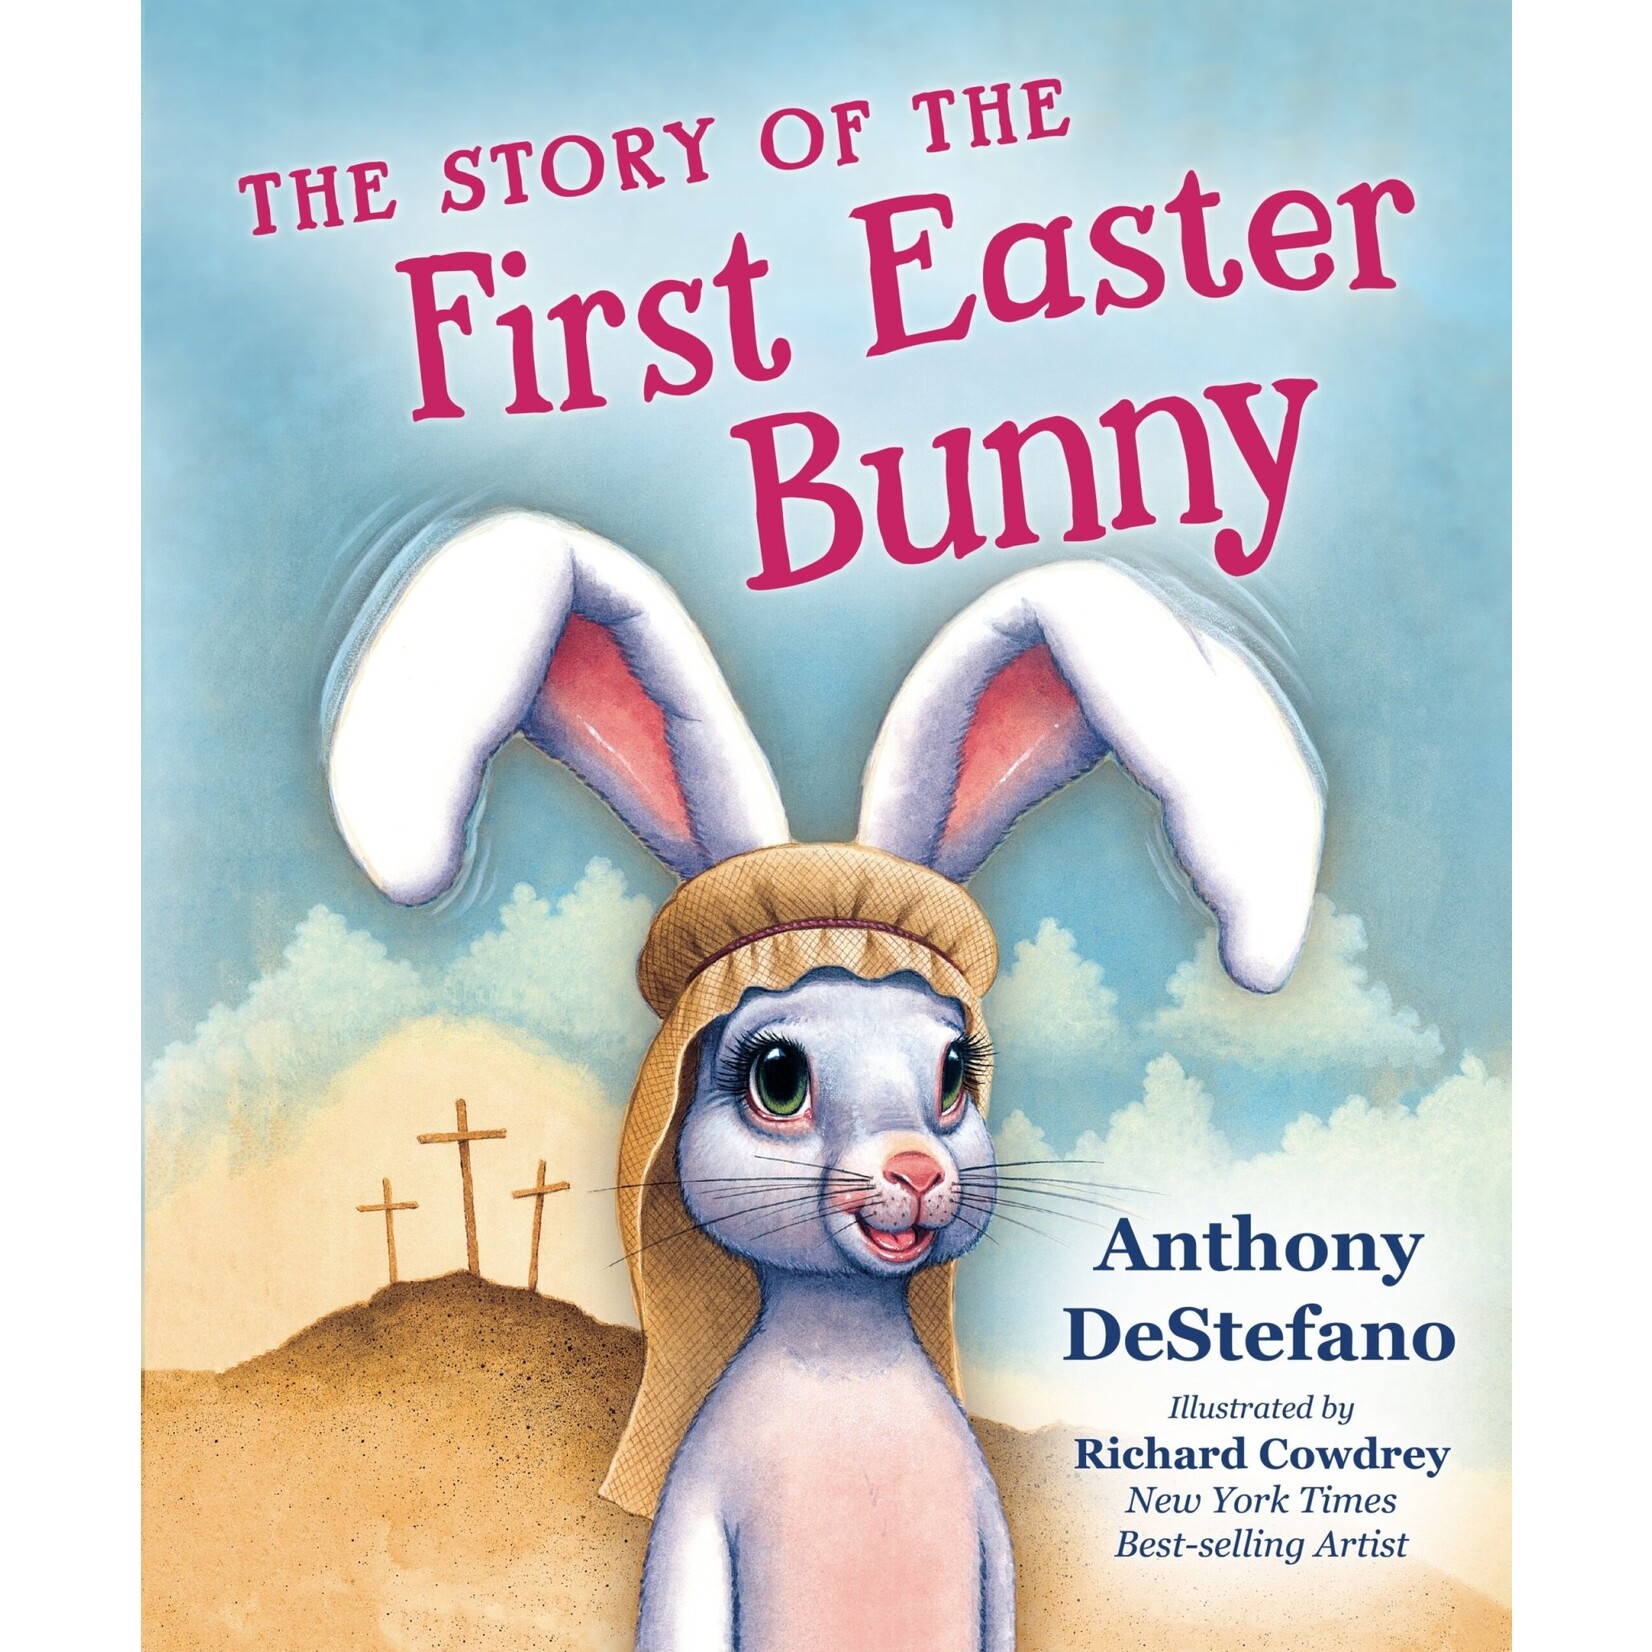 The Story of the First Easter Bunny